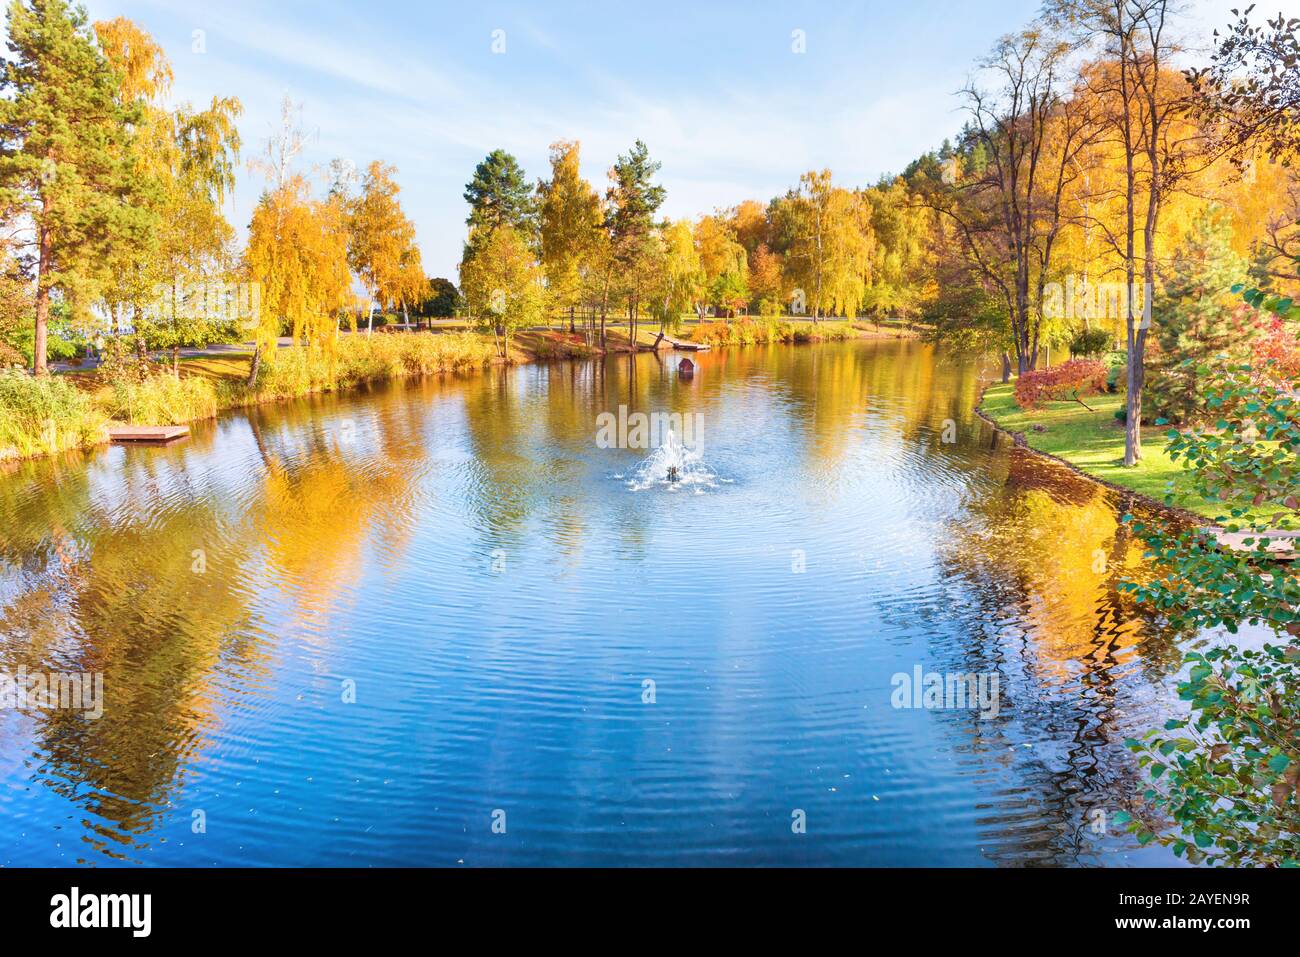 Lake in park with autumn forest Stock Photo